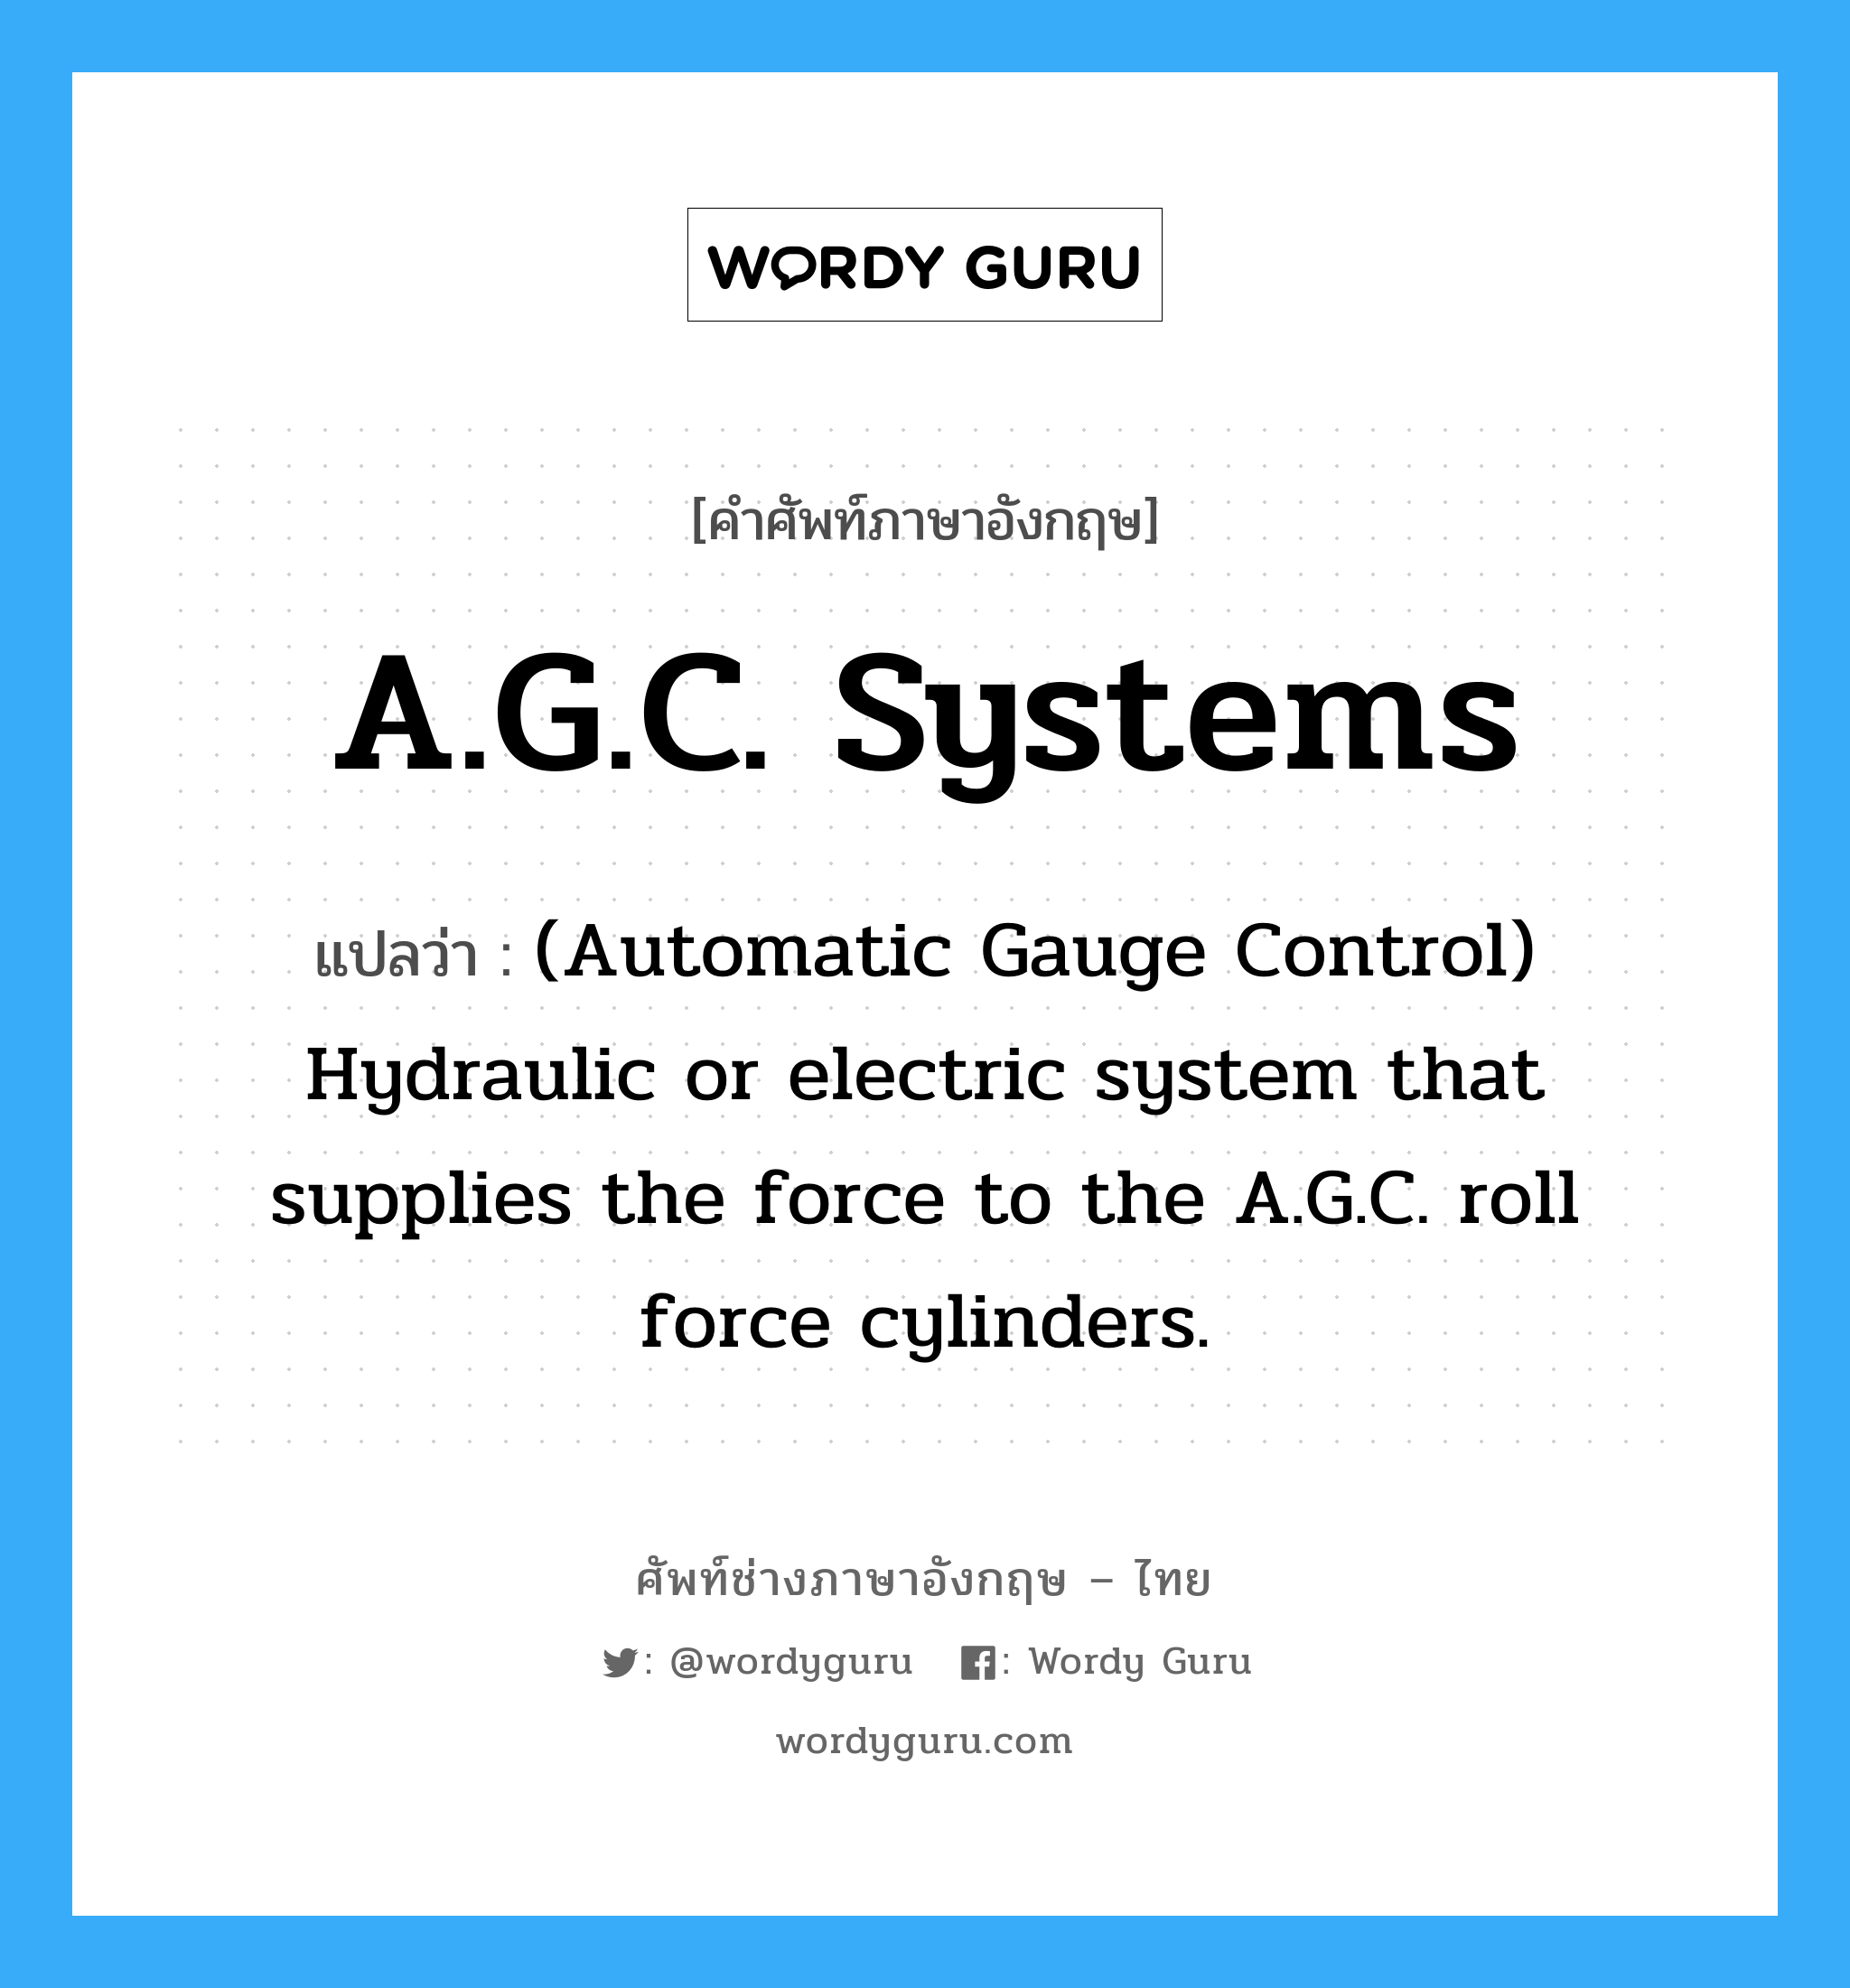 A.G.C. Systems แปลว่า?, คำศัพท์ช่างภาษาอังกฤษ - ไทย A.G.C. Systems คำศัพท์ภาษาอังกฤษ A.G.C. Systems แปลว่า (Automatic Gauge Control) Hydraulic or electric system that supplies the force to the A.G.C. roll force cylinders.